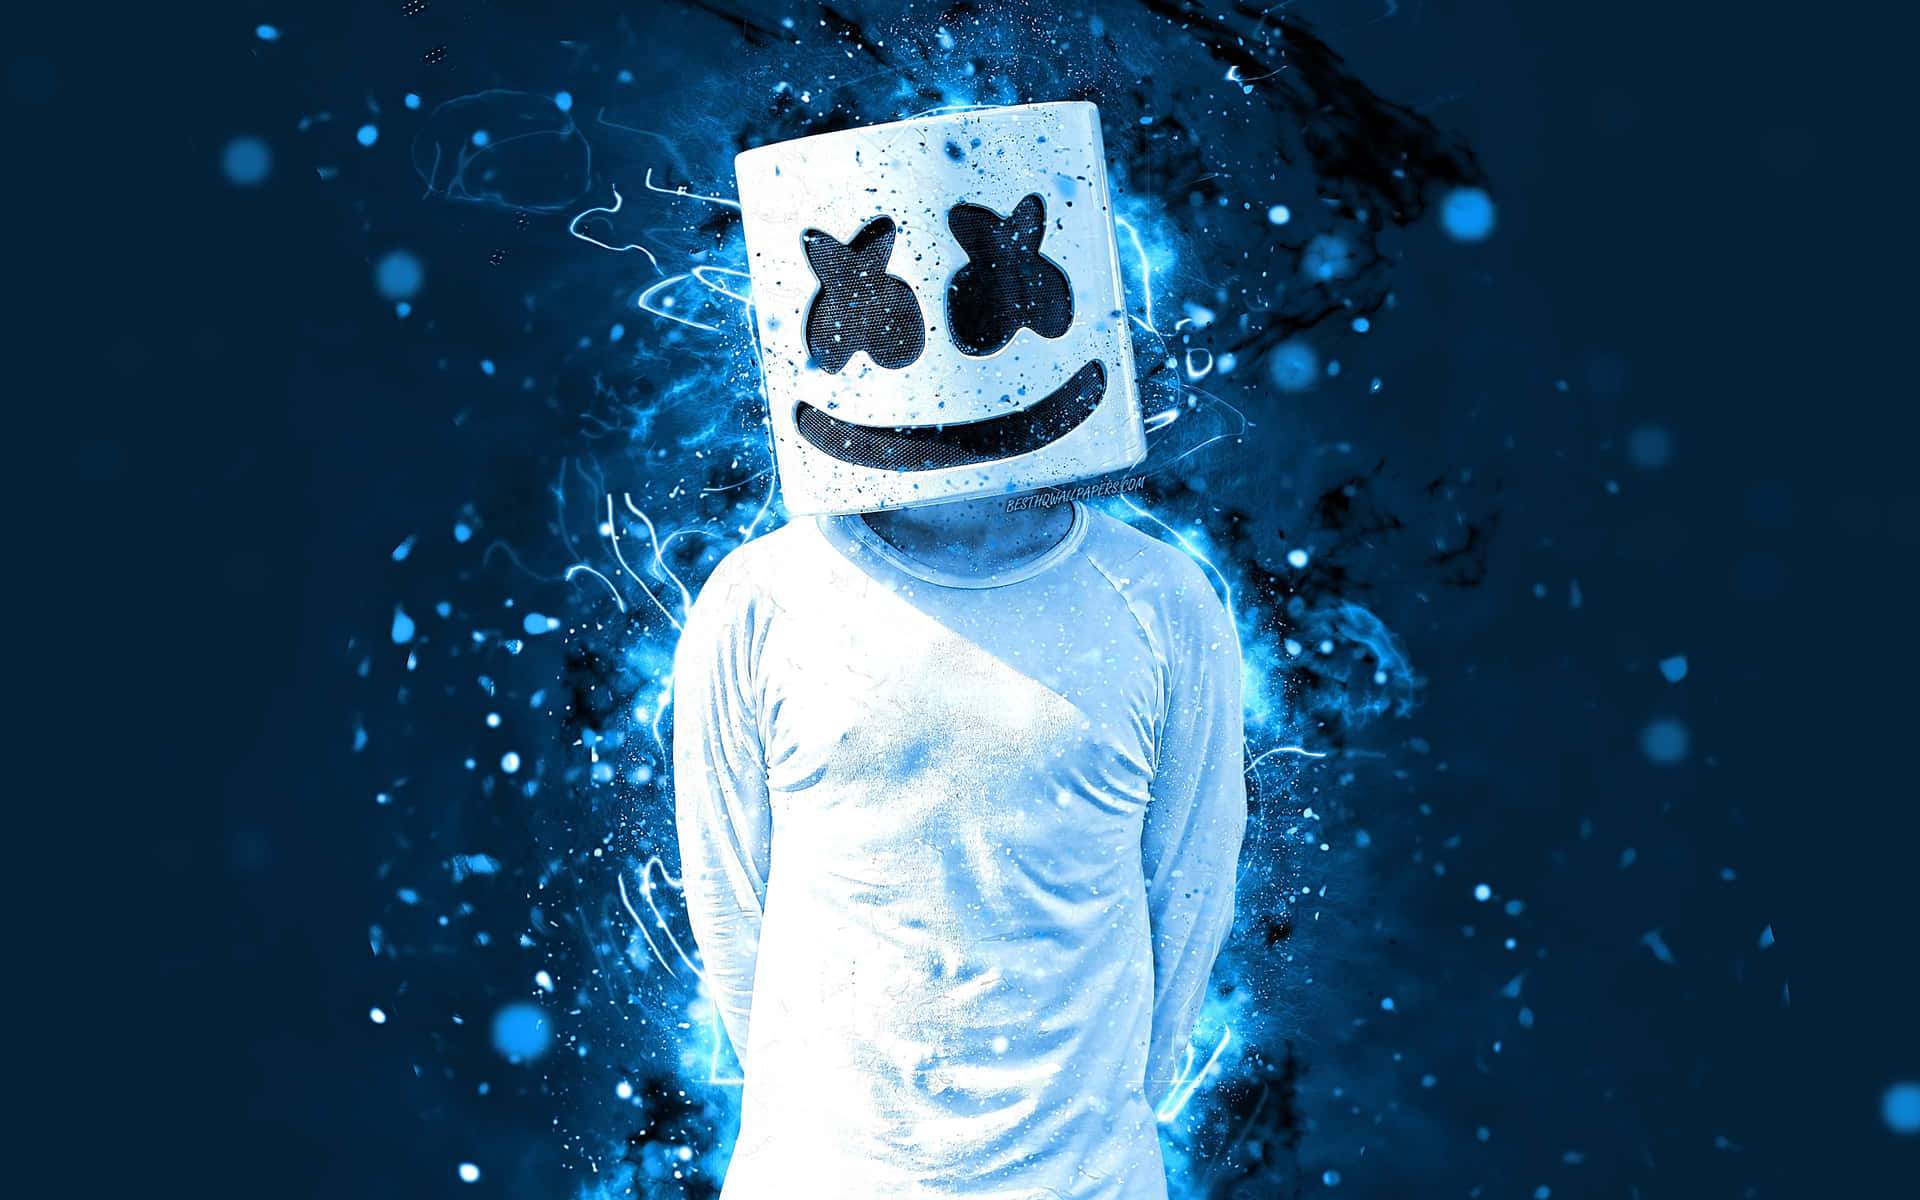 Experience the Party with Marshmello!